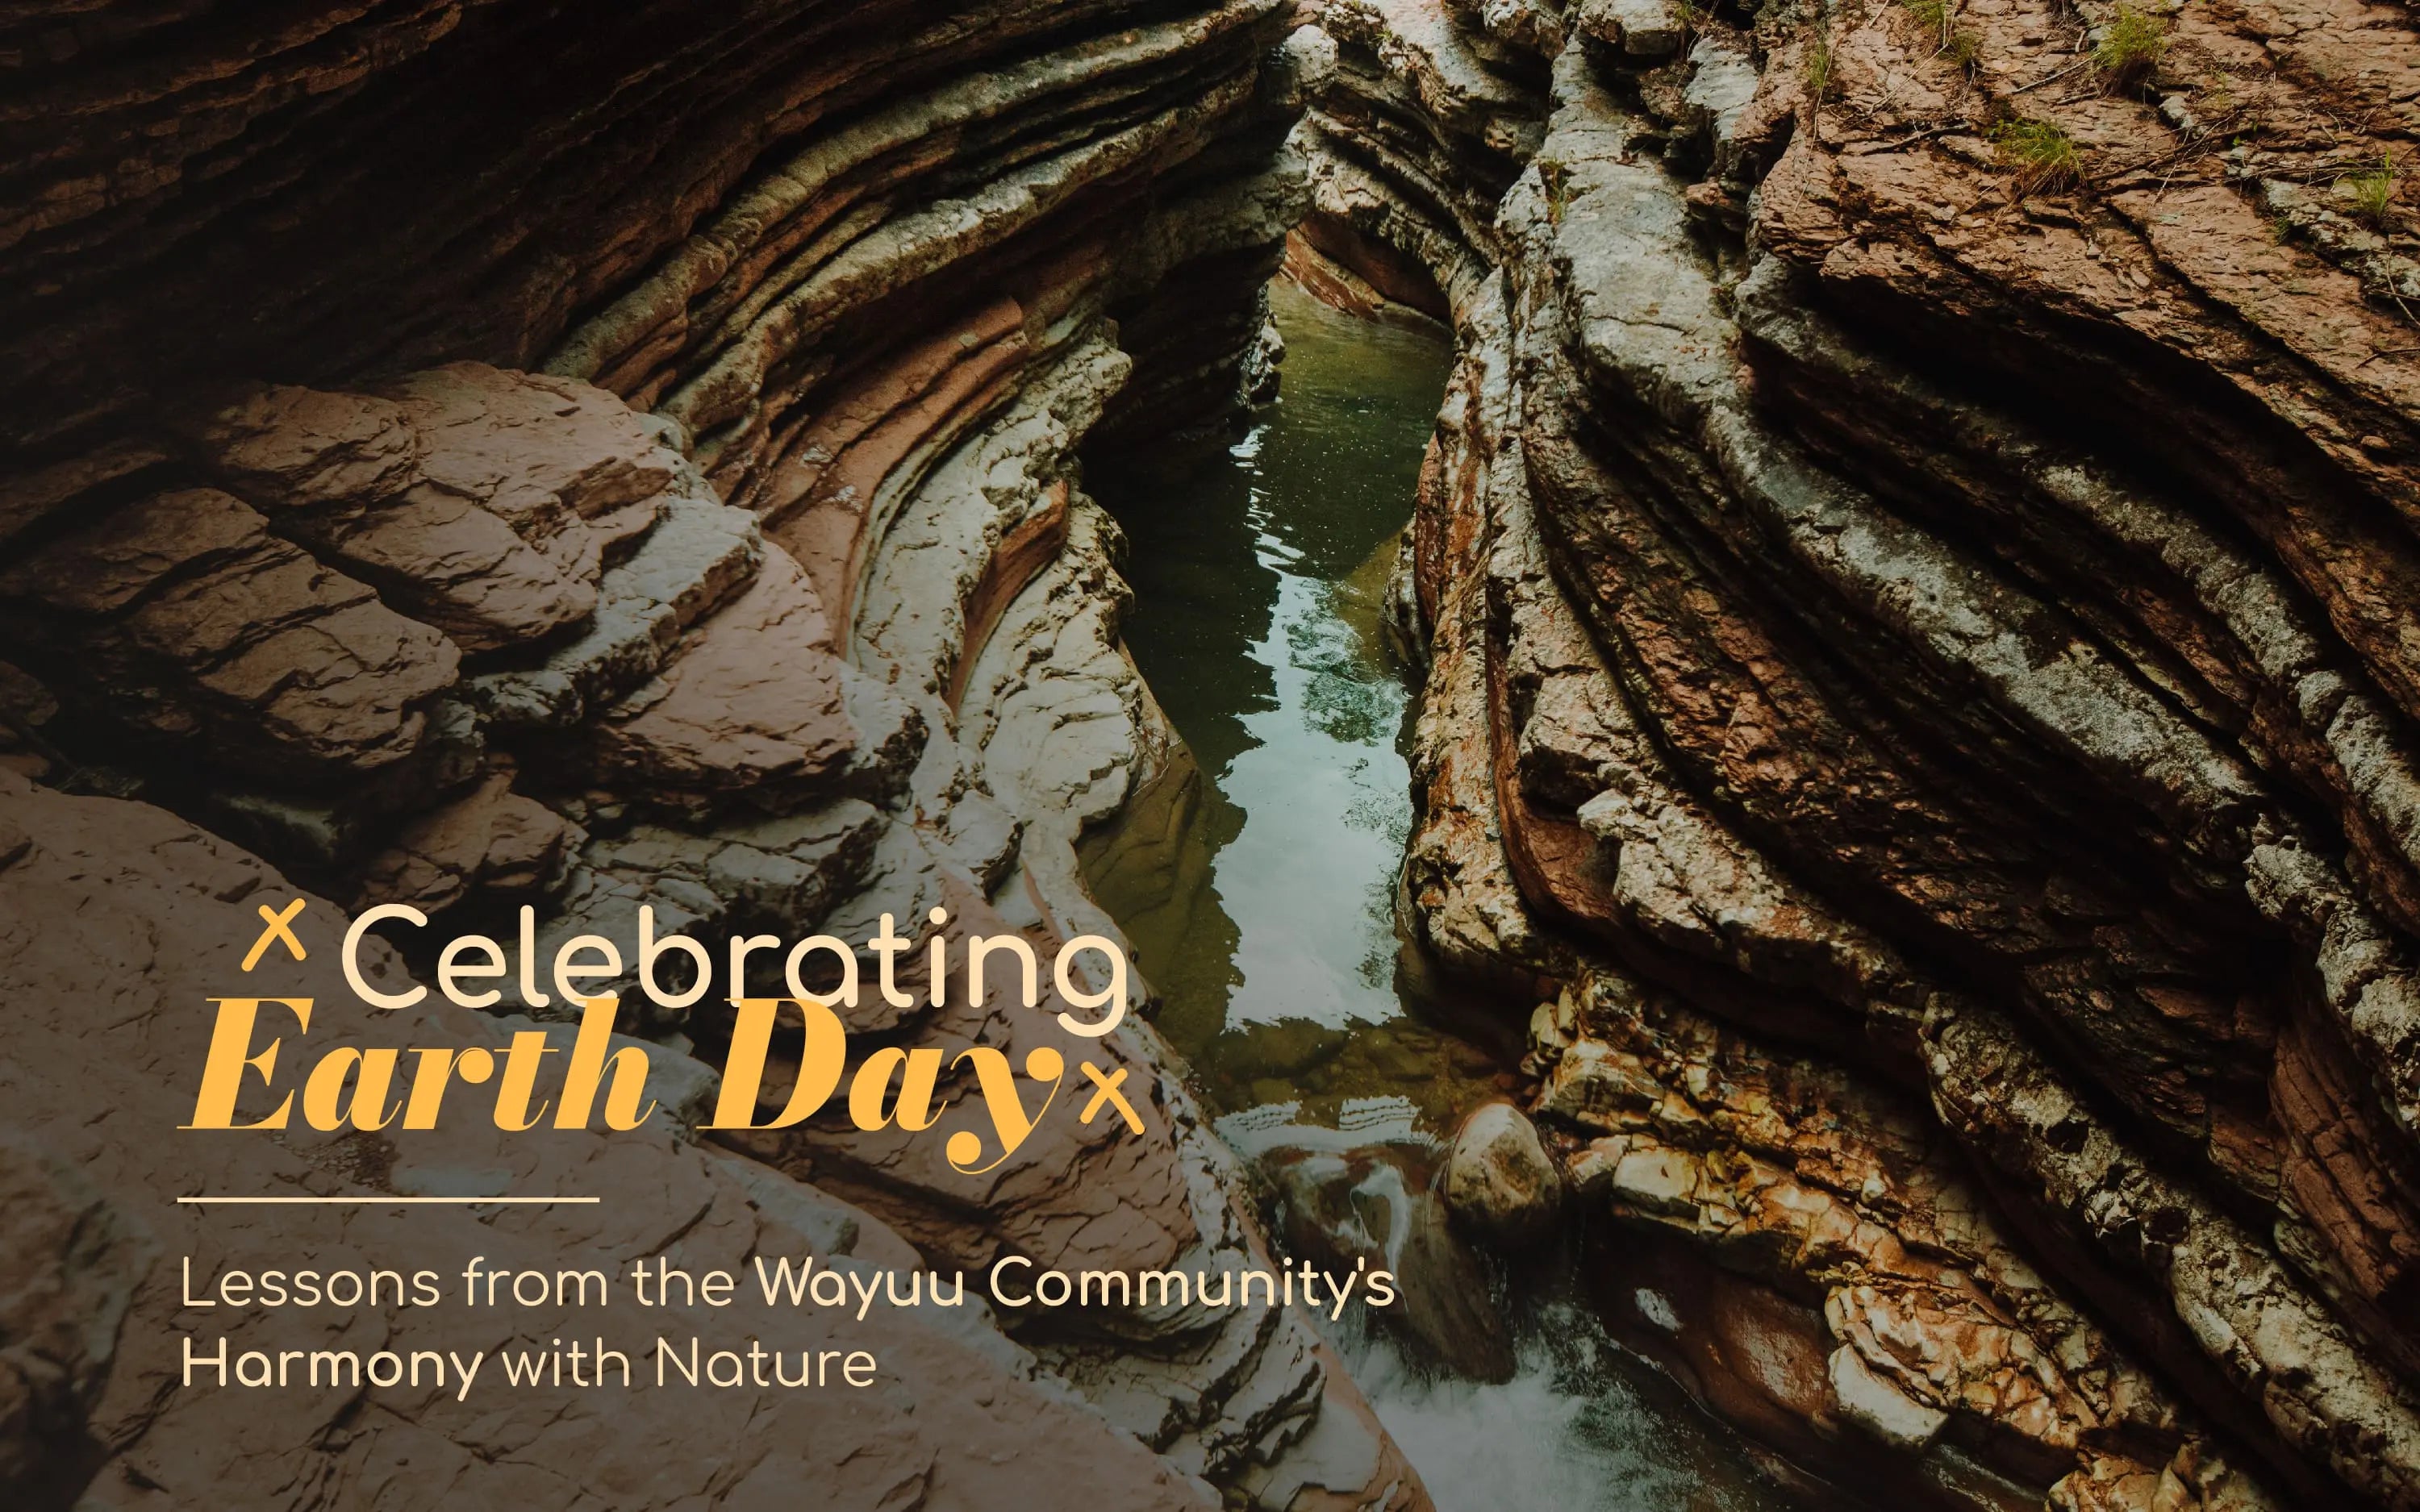 Celebrating Earth Day: Lessons from the Wayuu Community's Harmony with Nature